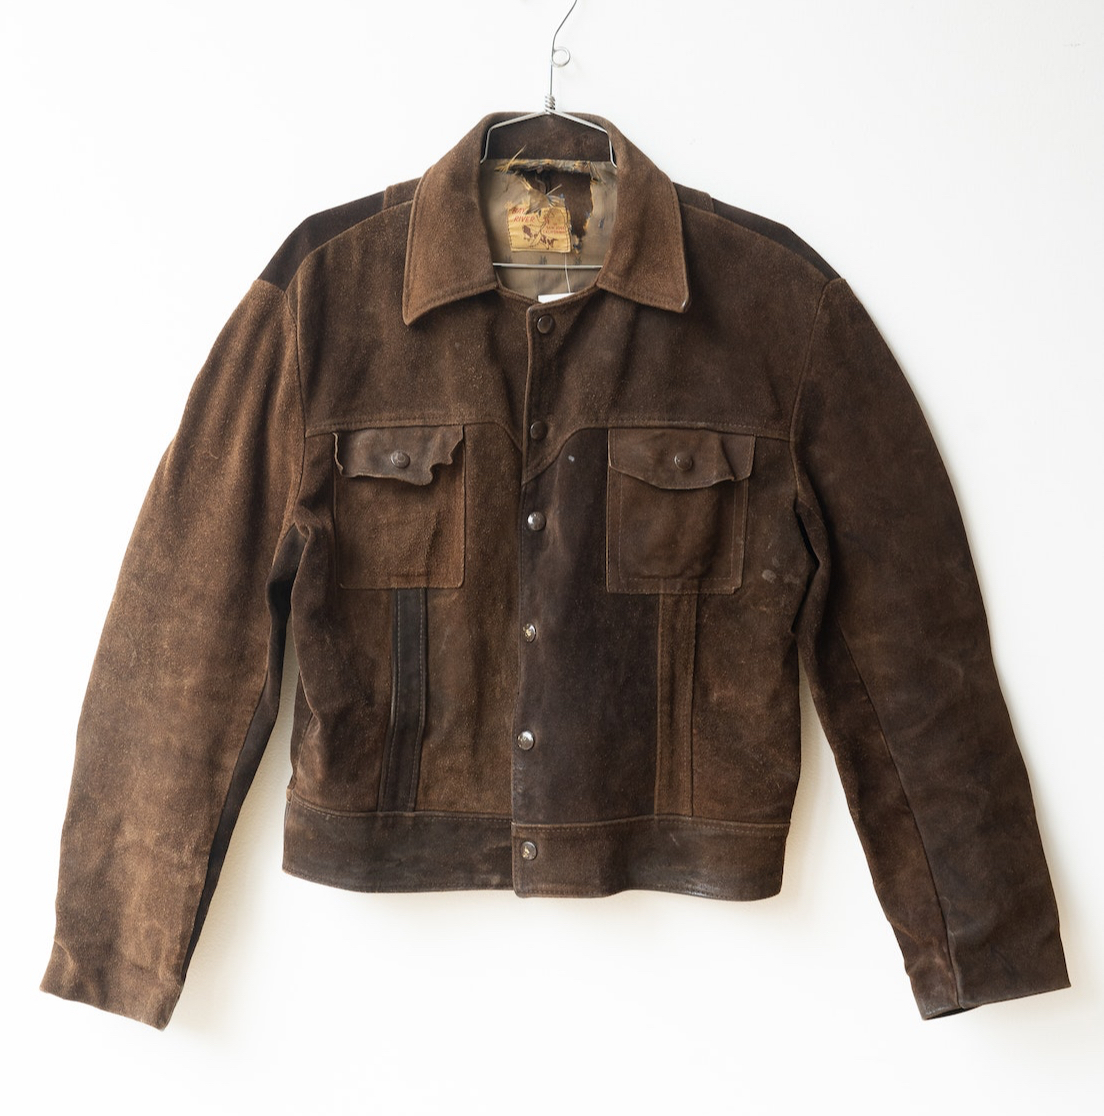 “Rancher” Jacket Research. Cody Rancher, Bay River, Hodkins and other ...